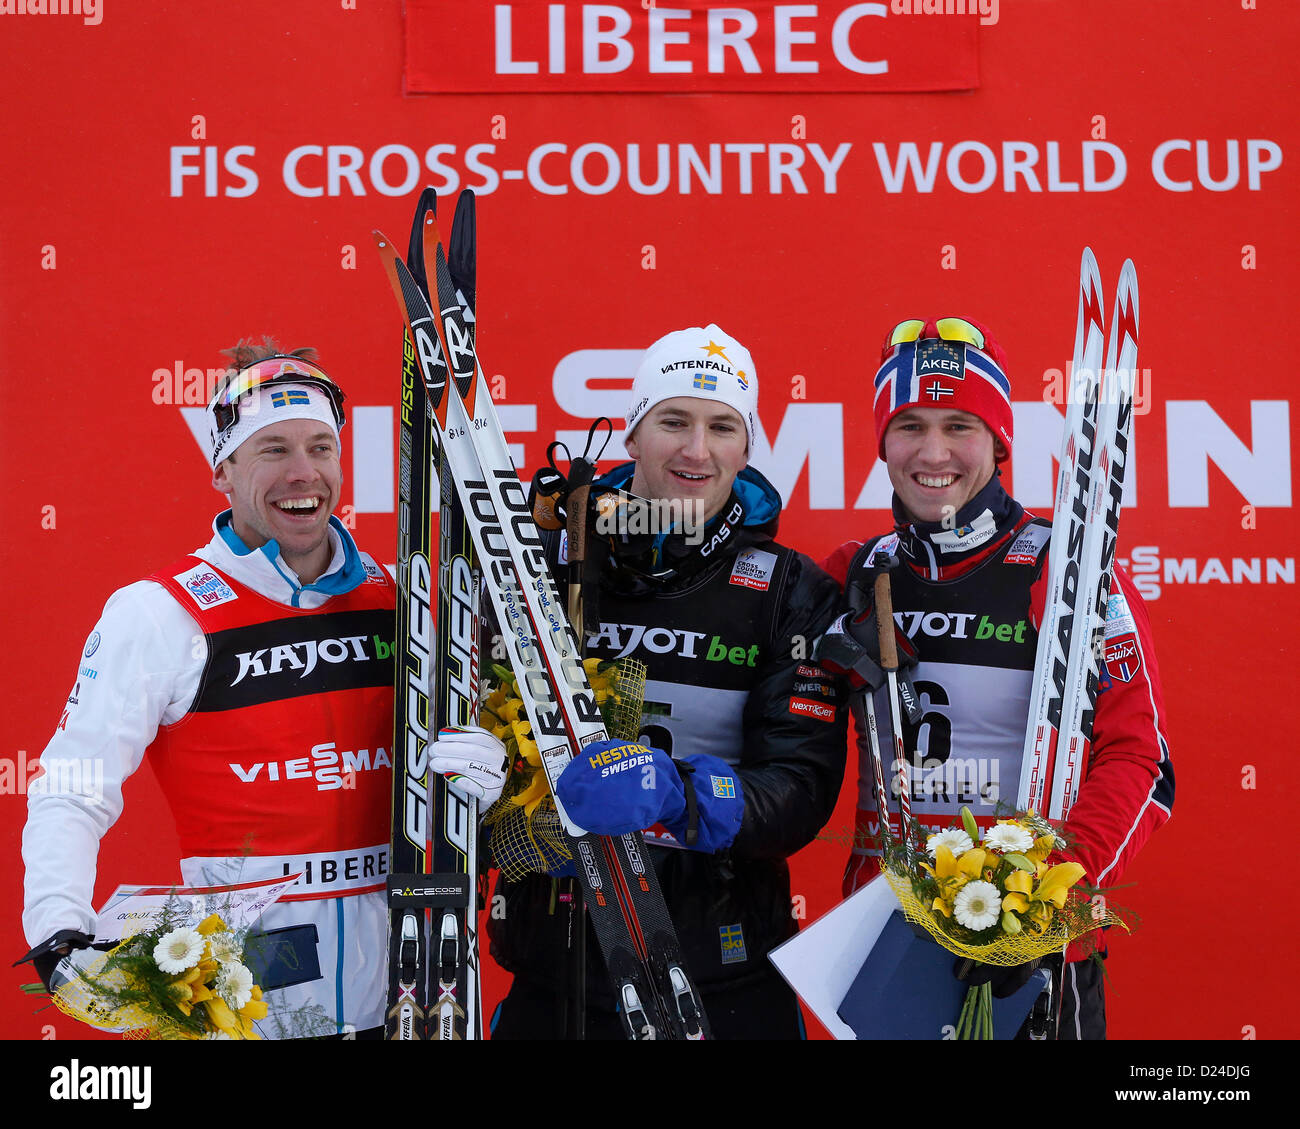 FIS Cross-Country Skiing World Cup, 2012-13, Teodor Peterson from Sweden (centre) won sprint in classic style, men, in Liberec, Czech Republic, January 12, 2013. Second placed Emil Jonsson from Sweden (left) and third placed Paal Godberg from Norway (right) are seen in Liberec, Czech Republic, January 12, 2013. (CTK Photo/Radek Petrasek) Stock Photo